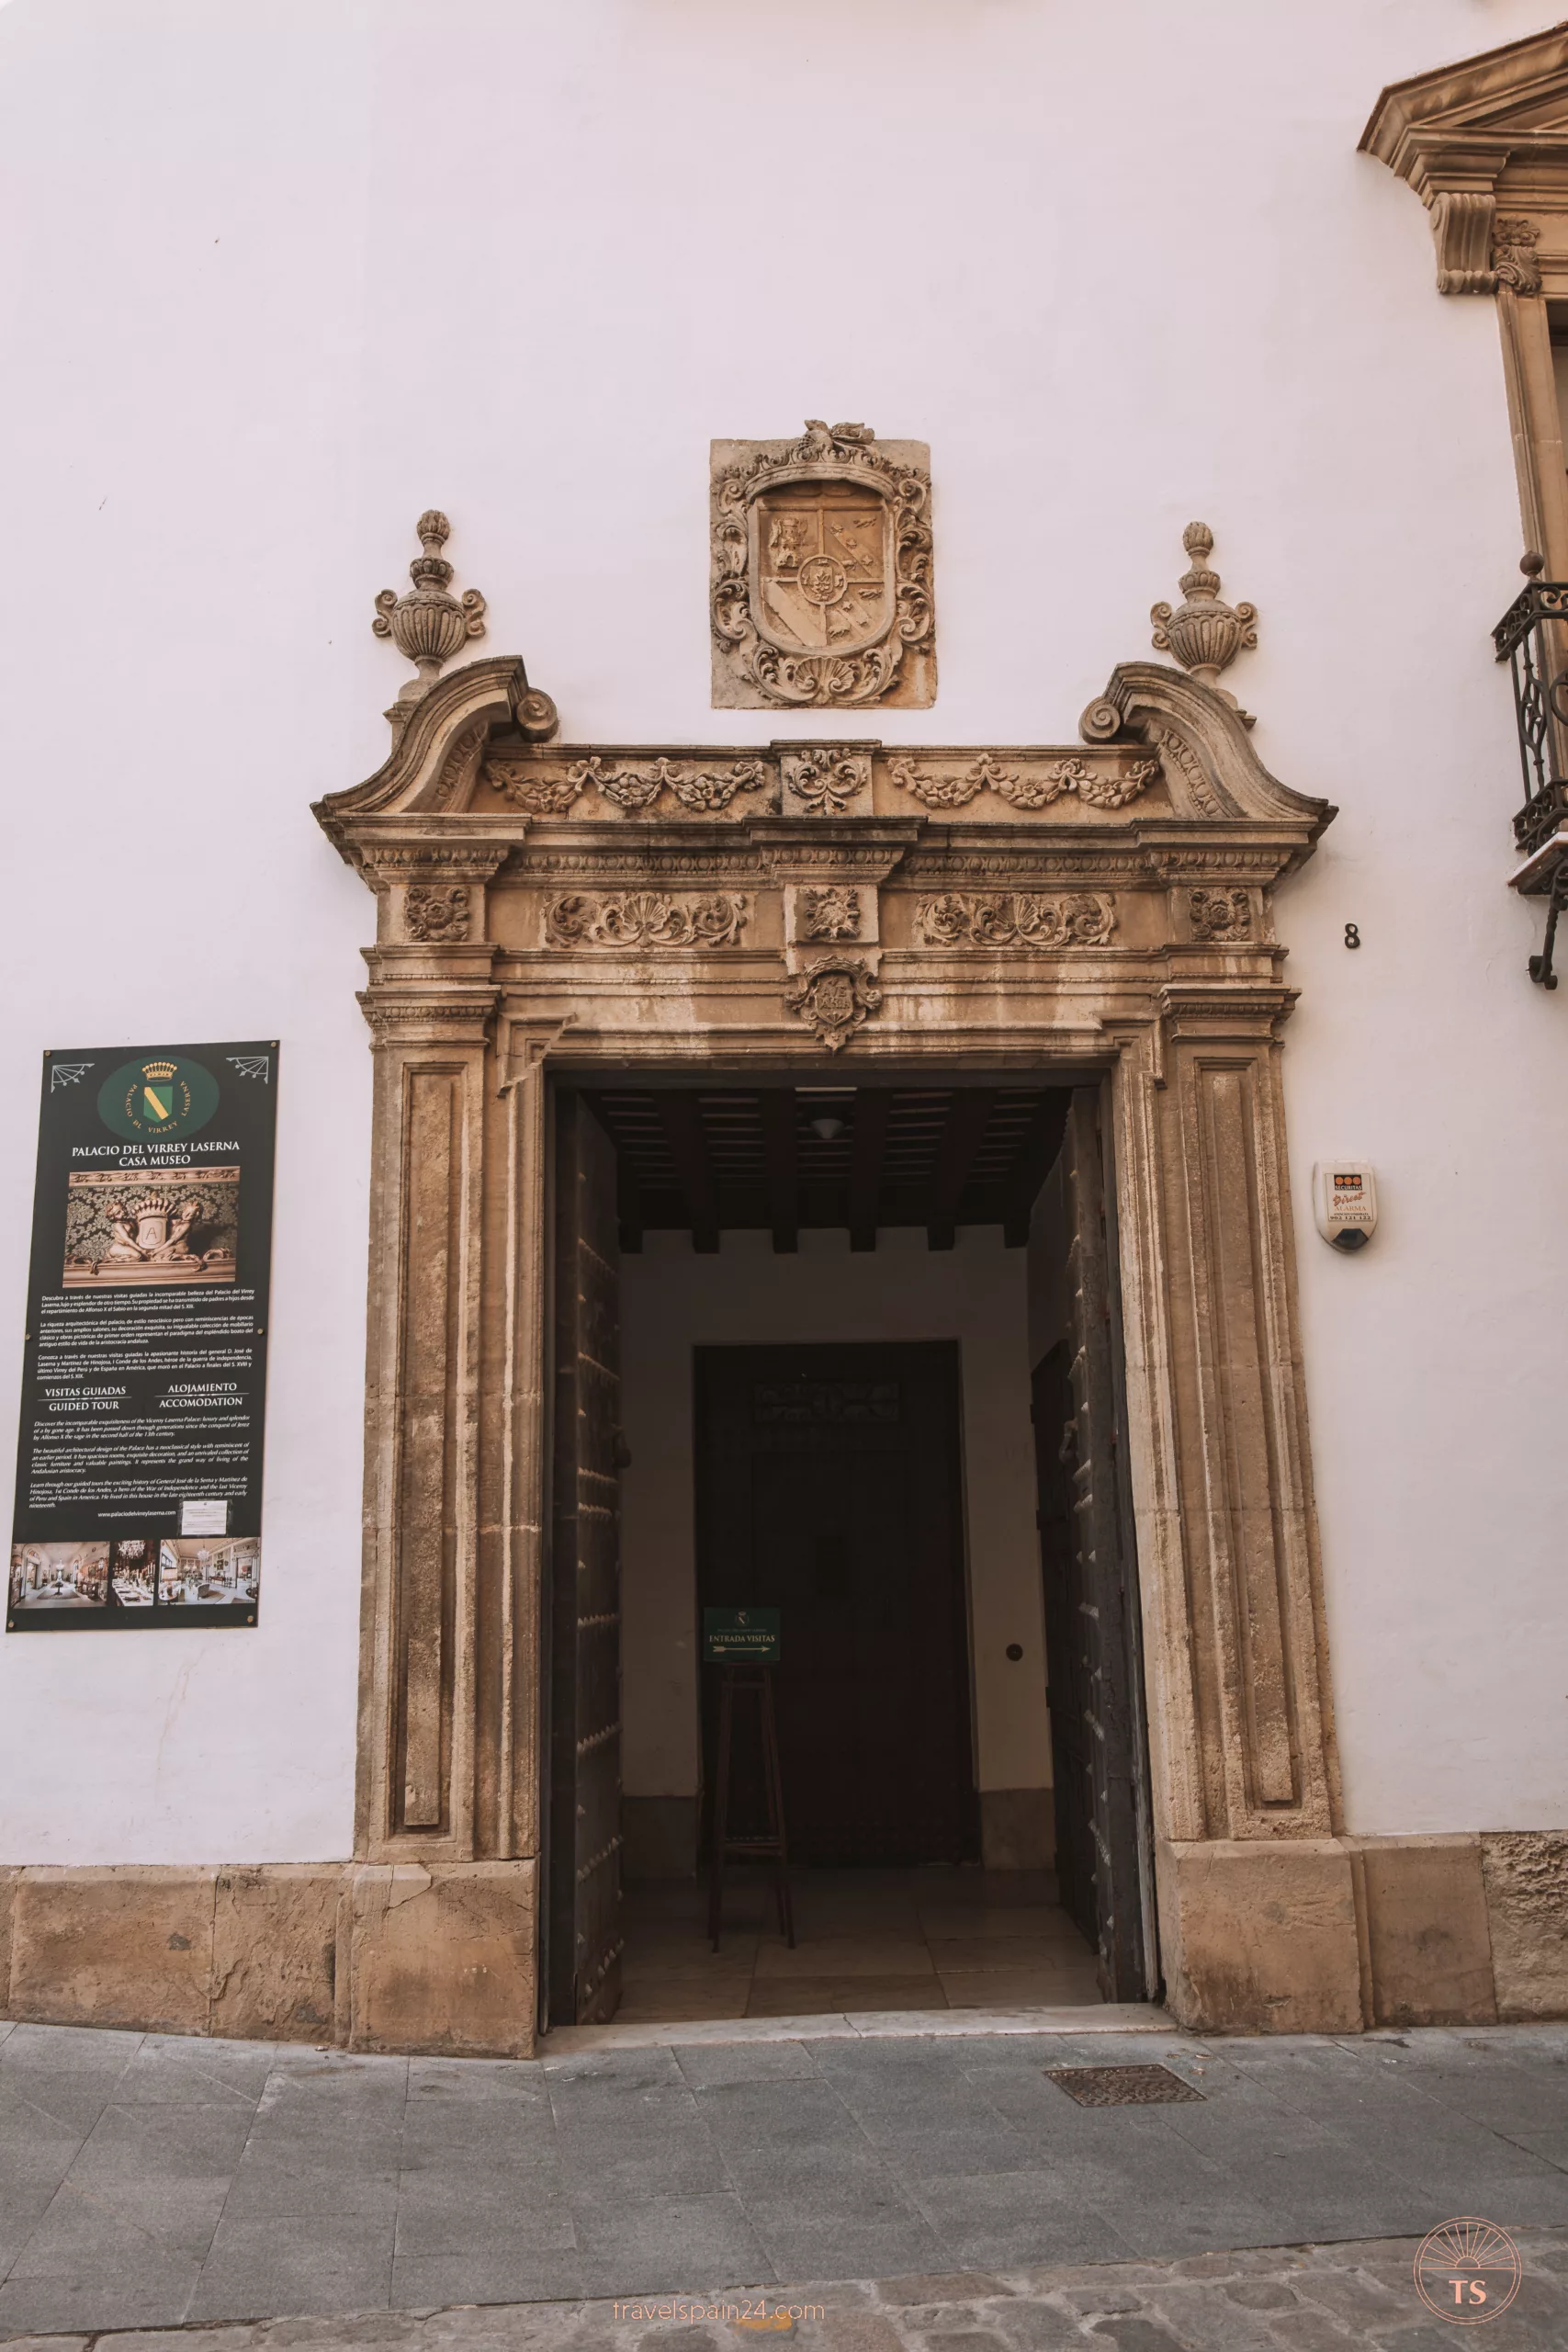 Entrance of Palacio del Virrey Laserna in Jerez de la Frontera, highlighting the historical architecture. This image is part of the guide to notable sites in the city.